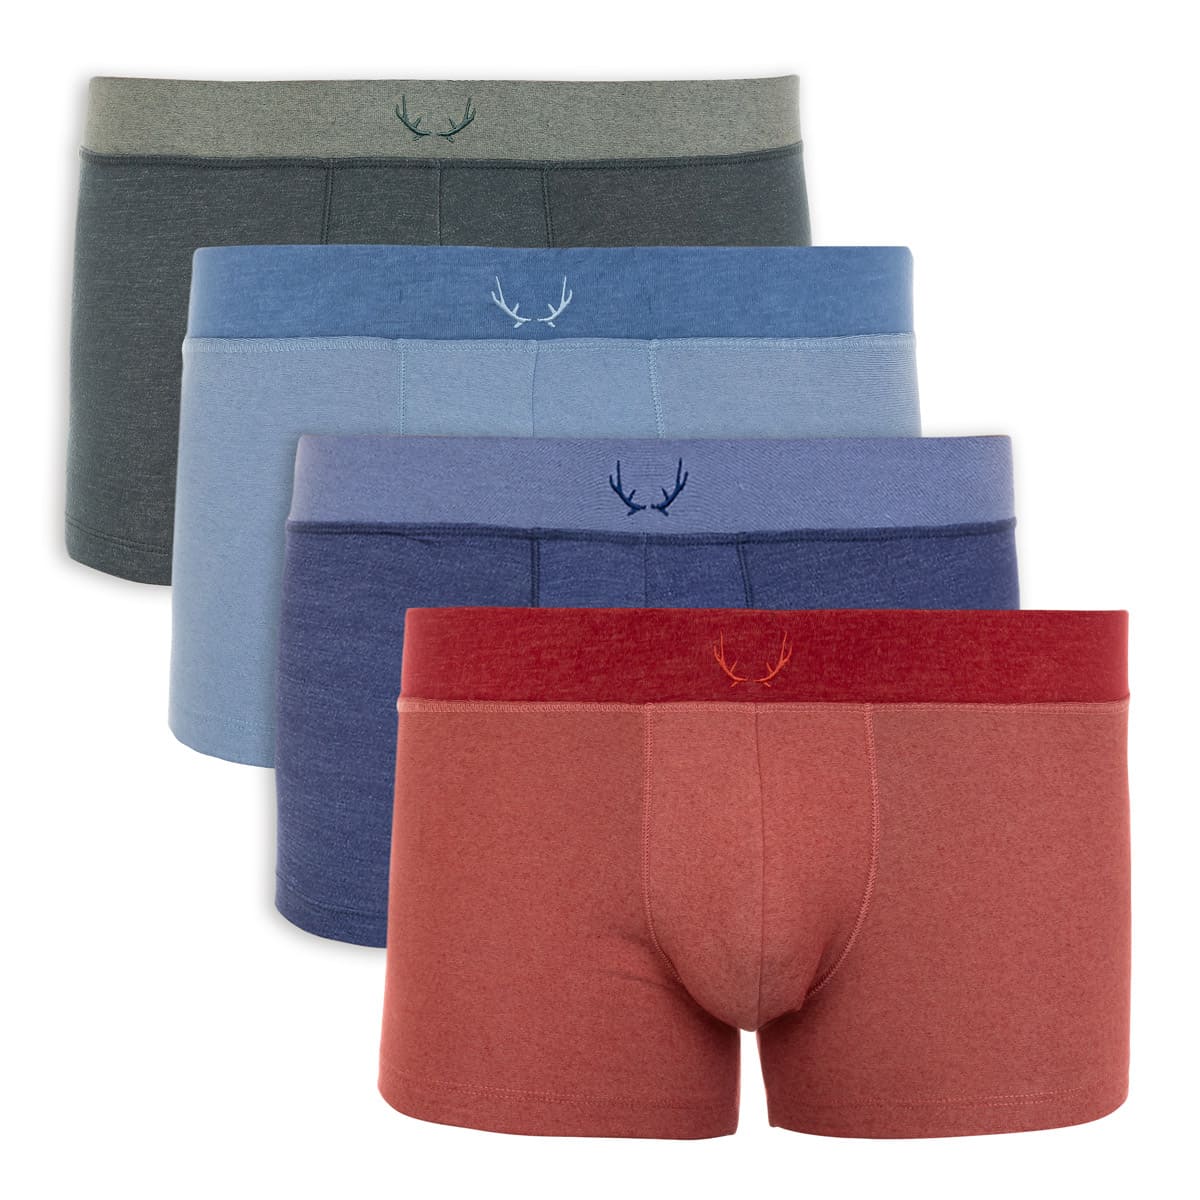 Boxershorts 4-pack made of Tencel by Bluebuck